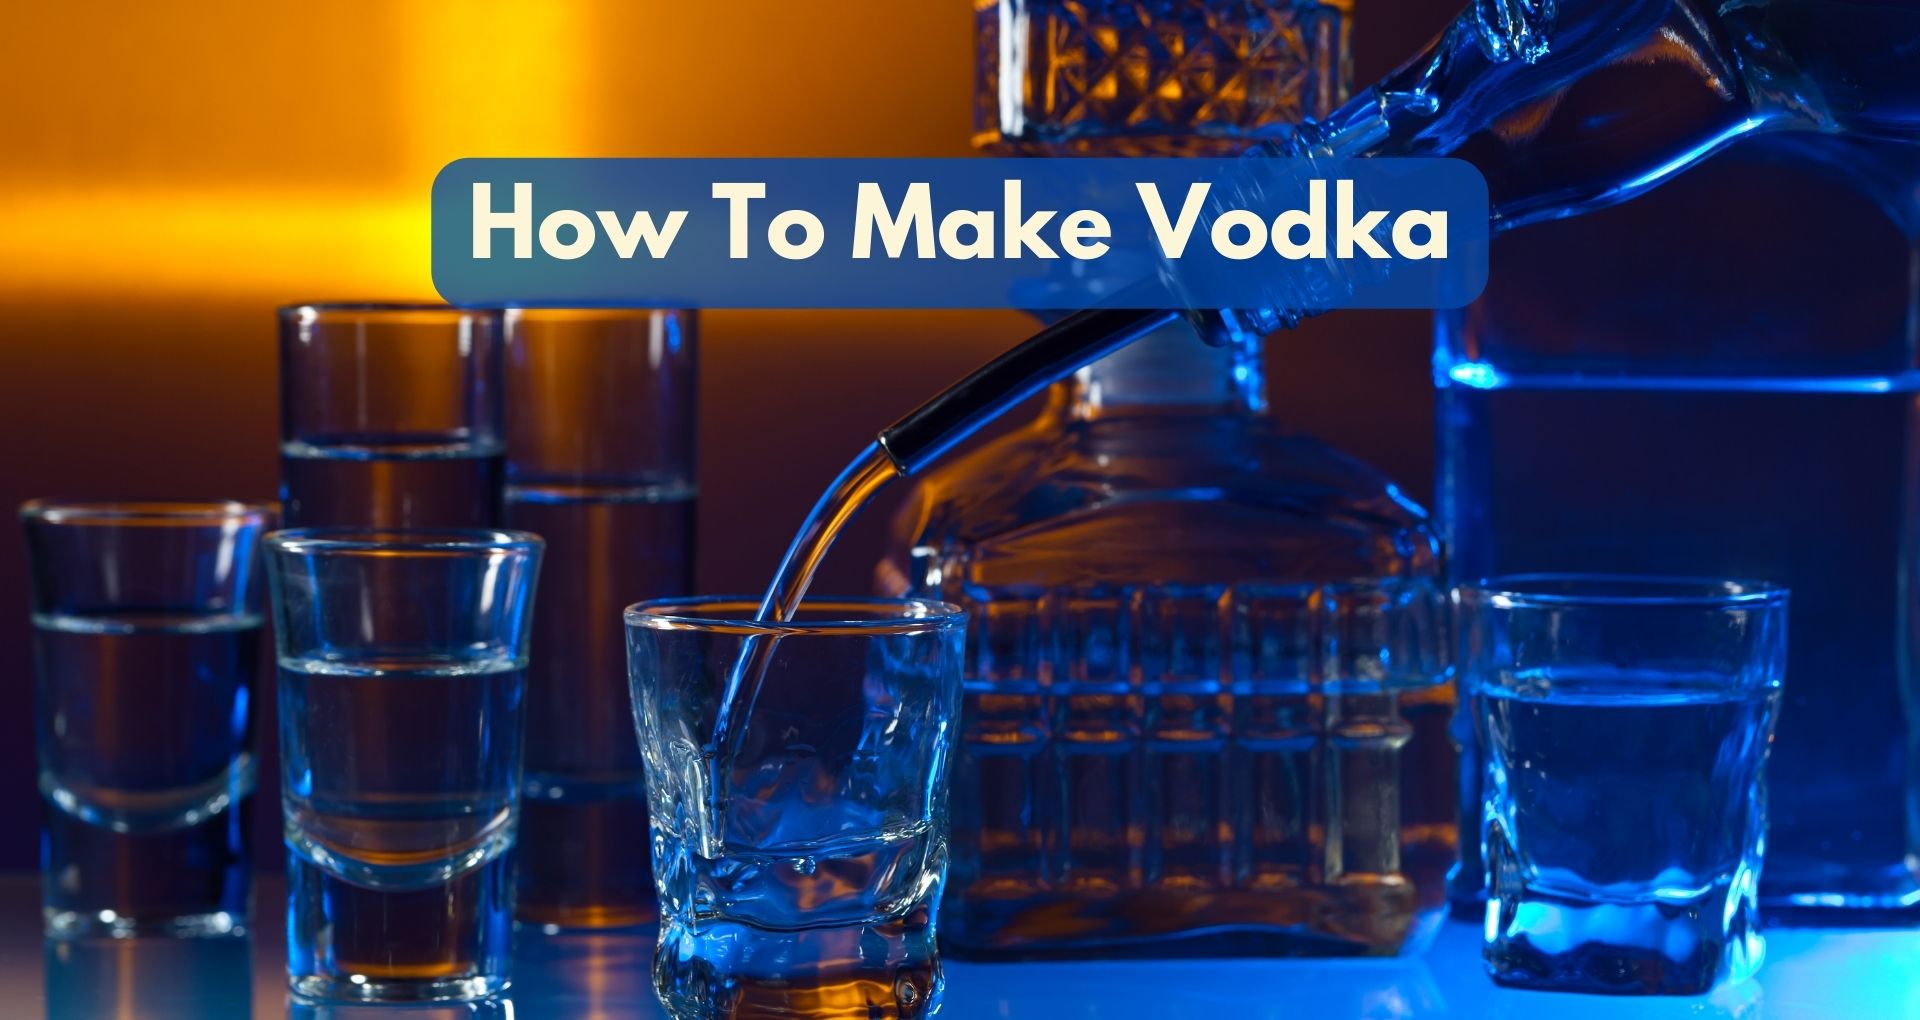 How To Make Vodka (Step-by-Step Guide)